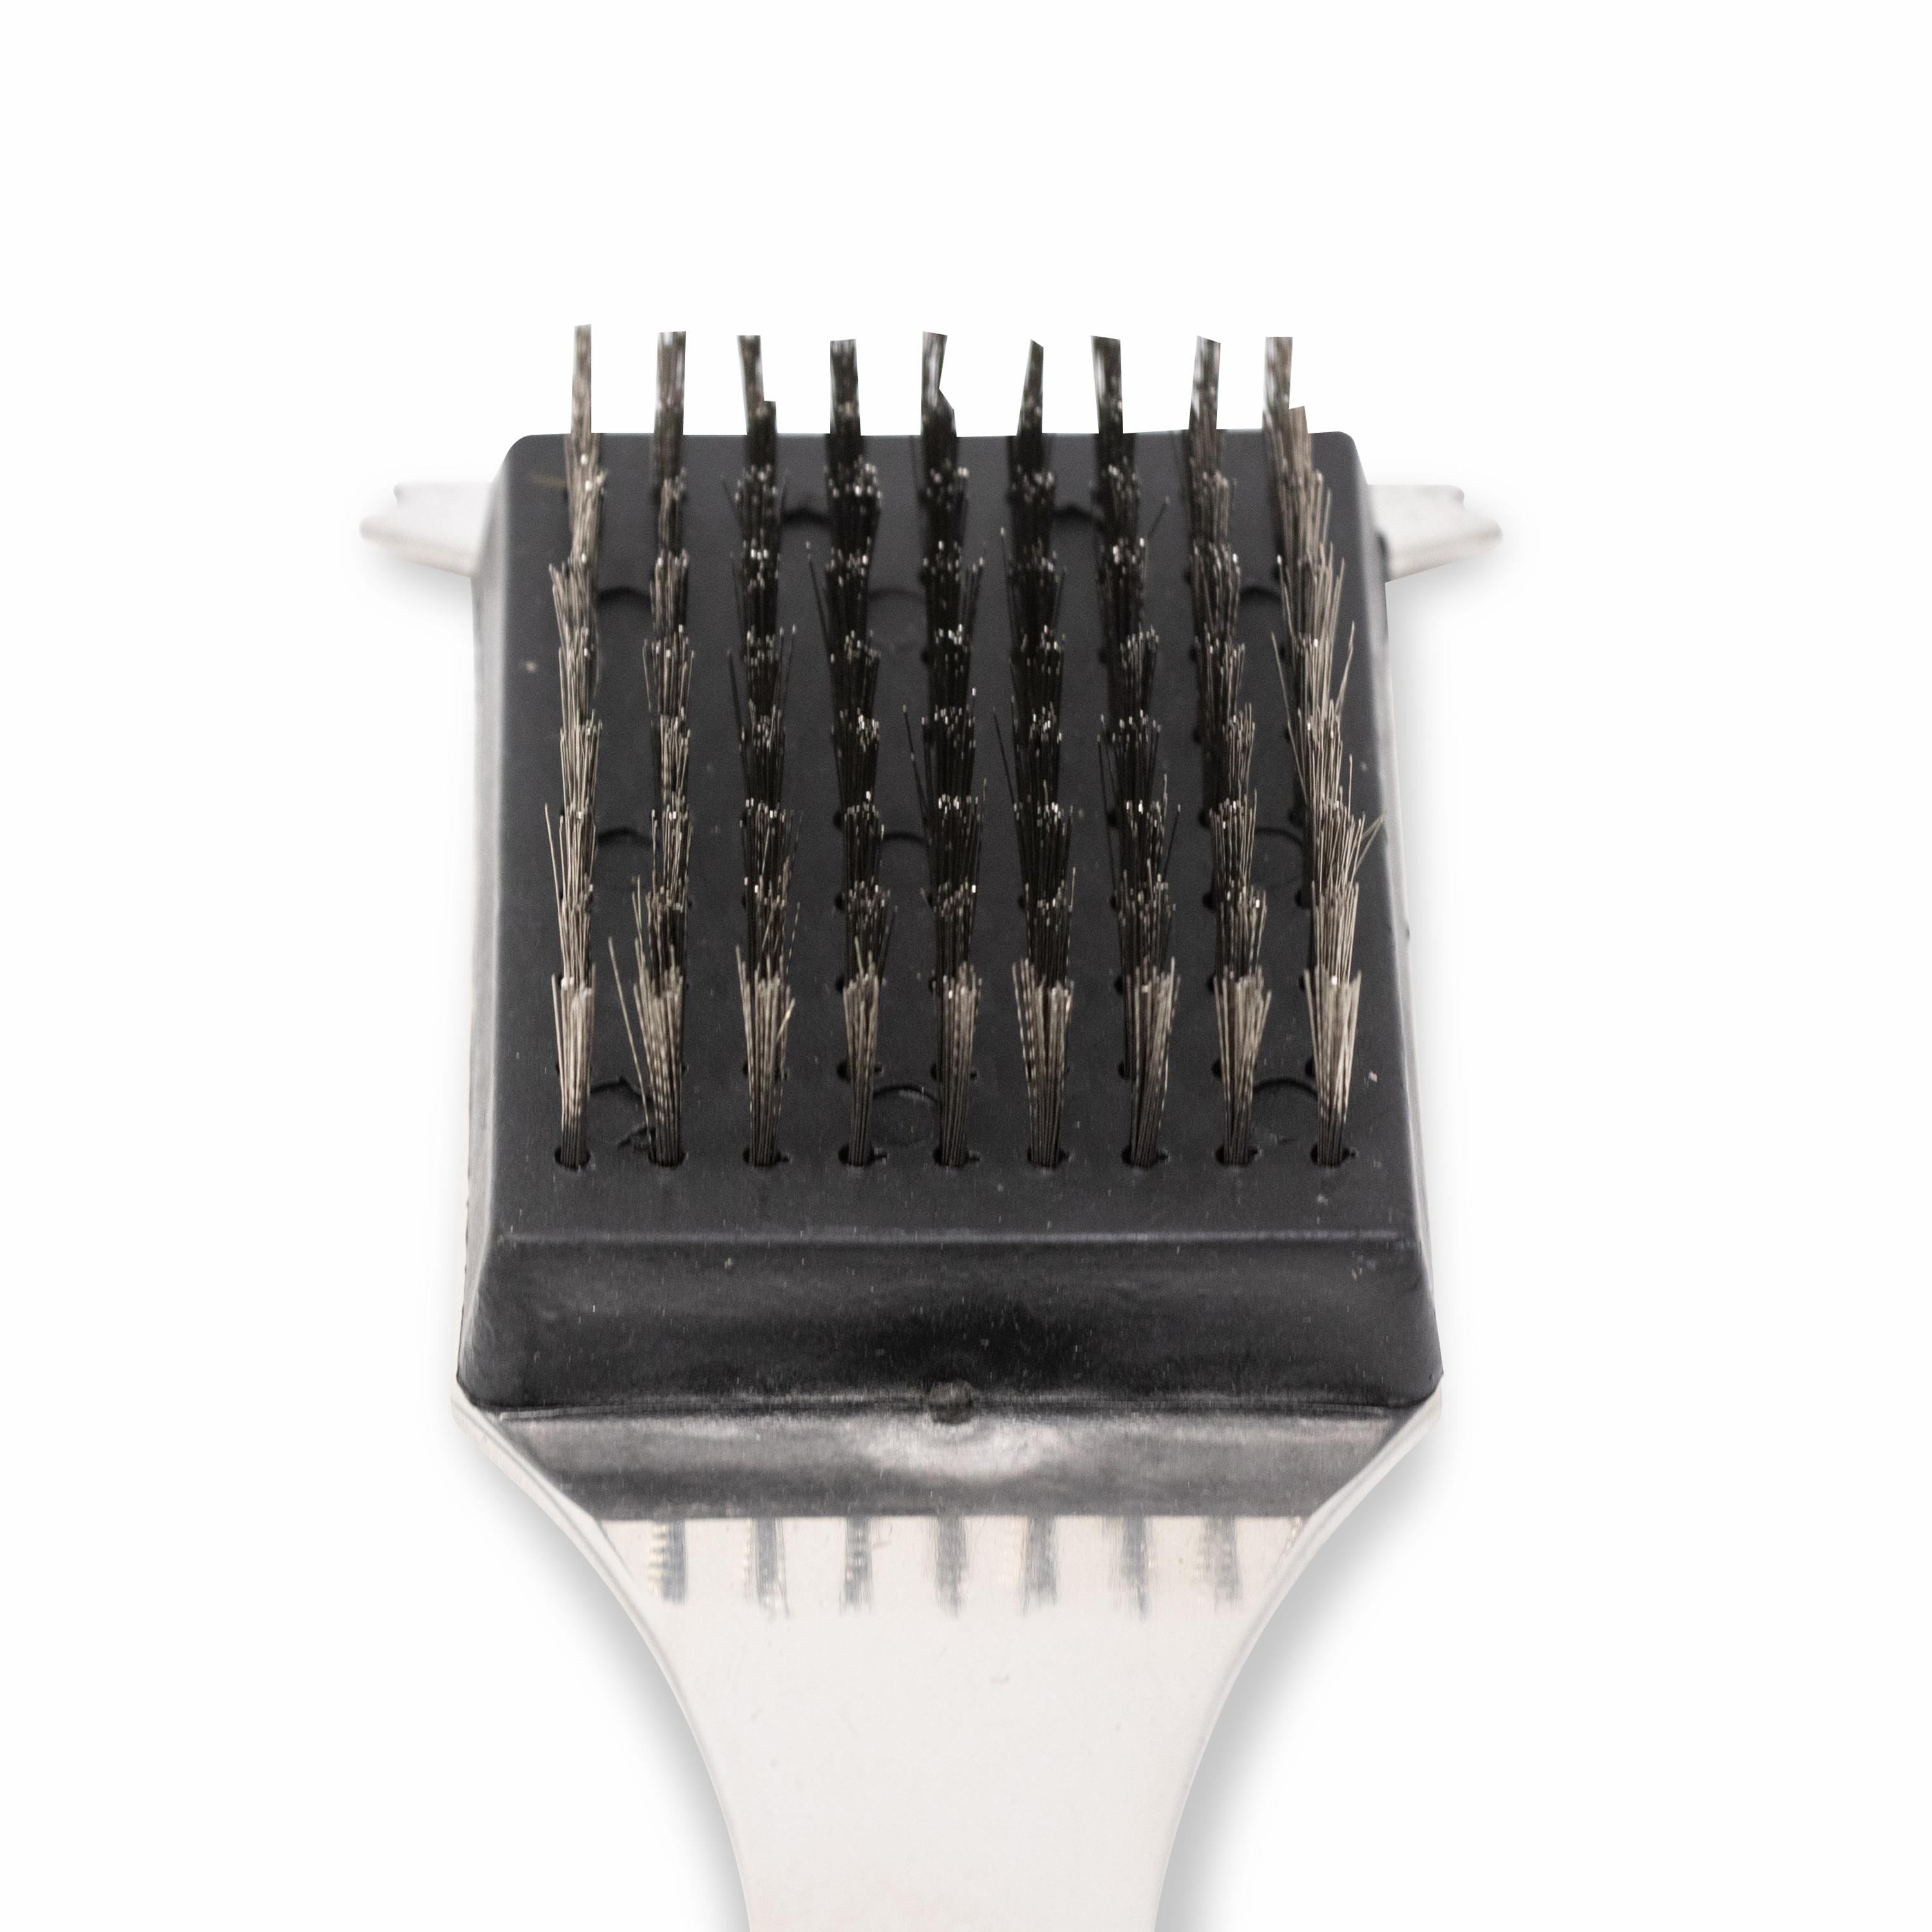 CuisinartÂ® Stainless Steel Grill Cleaning Brush - 16.5 inch Grill Brush, Hook To Store At Grill - image 2 of 8